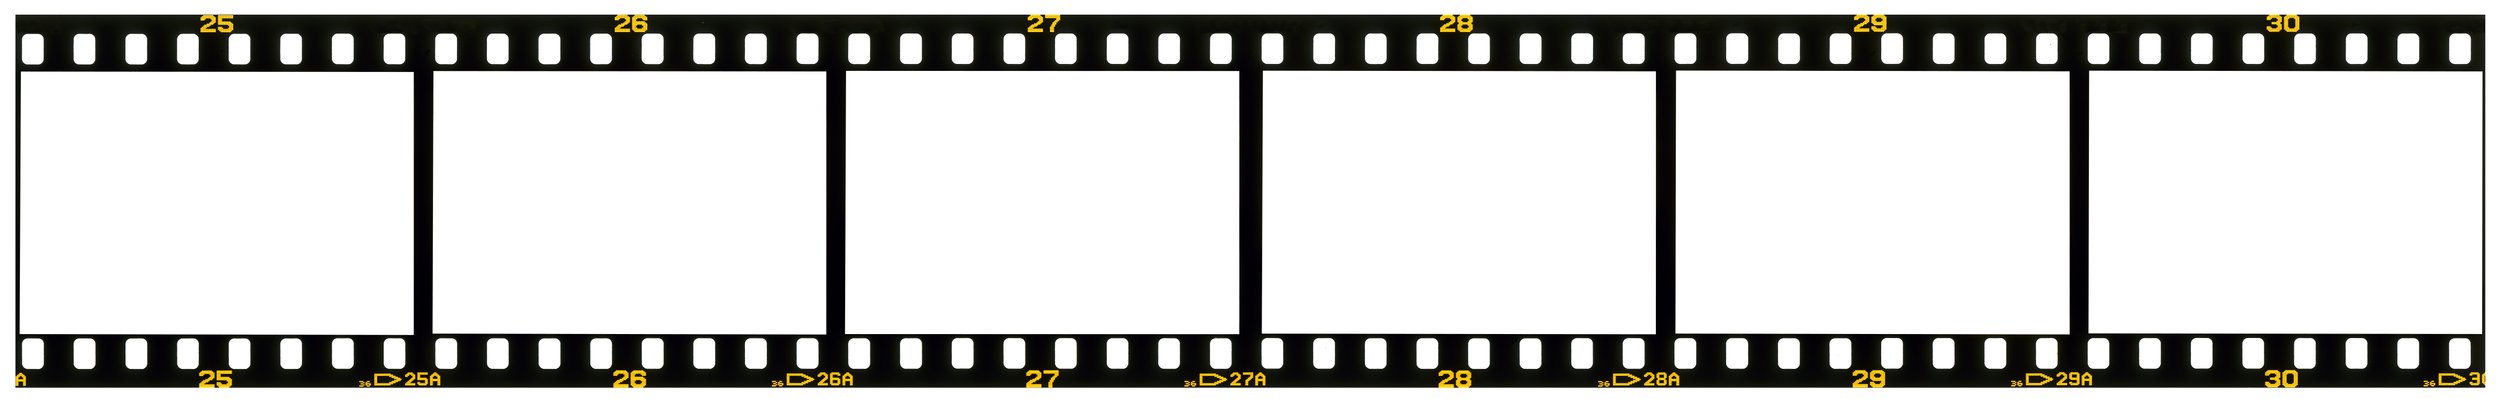 six-pictures-film-strip-texture-with-blank-space-2021-12-09-11-20-22-utc.jpg